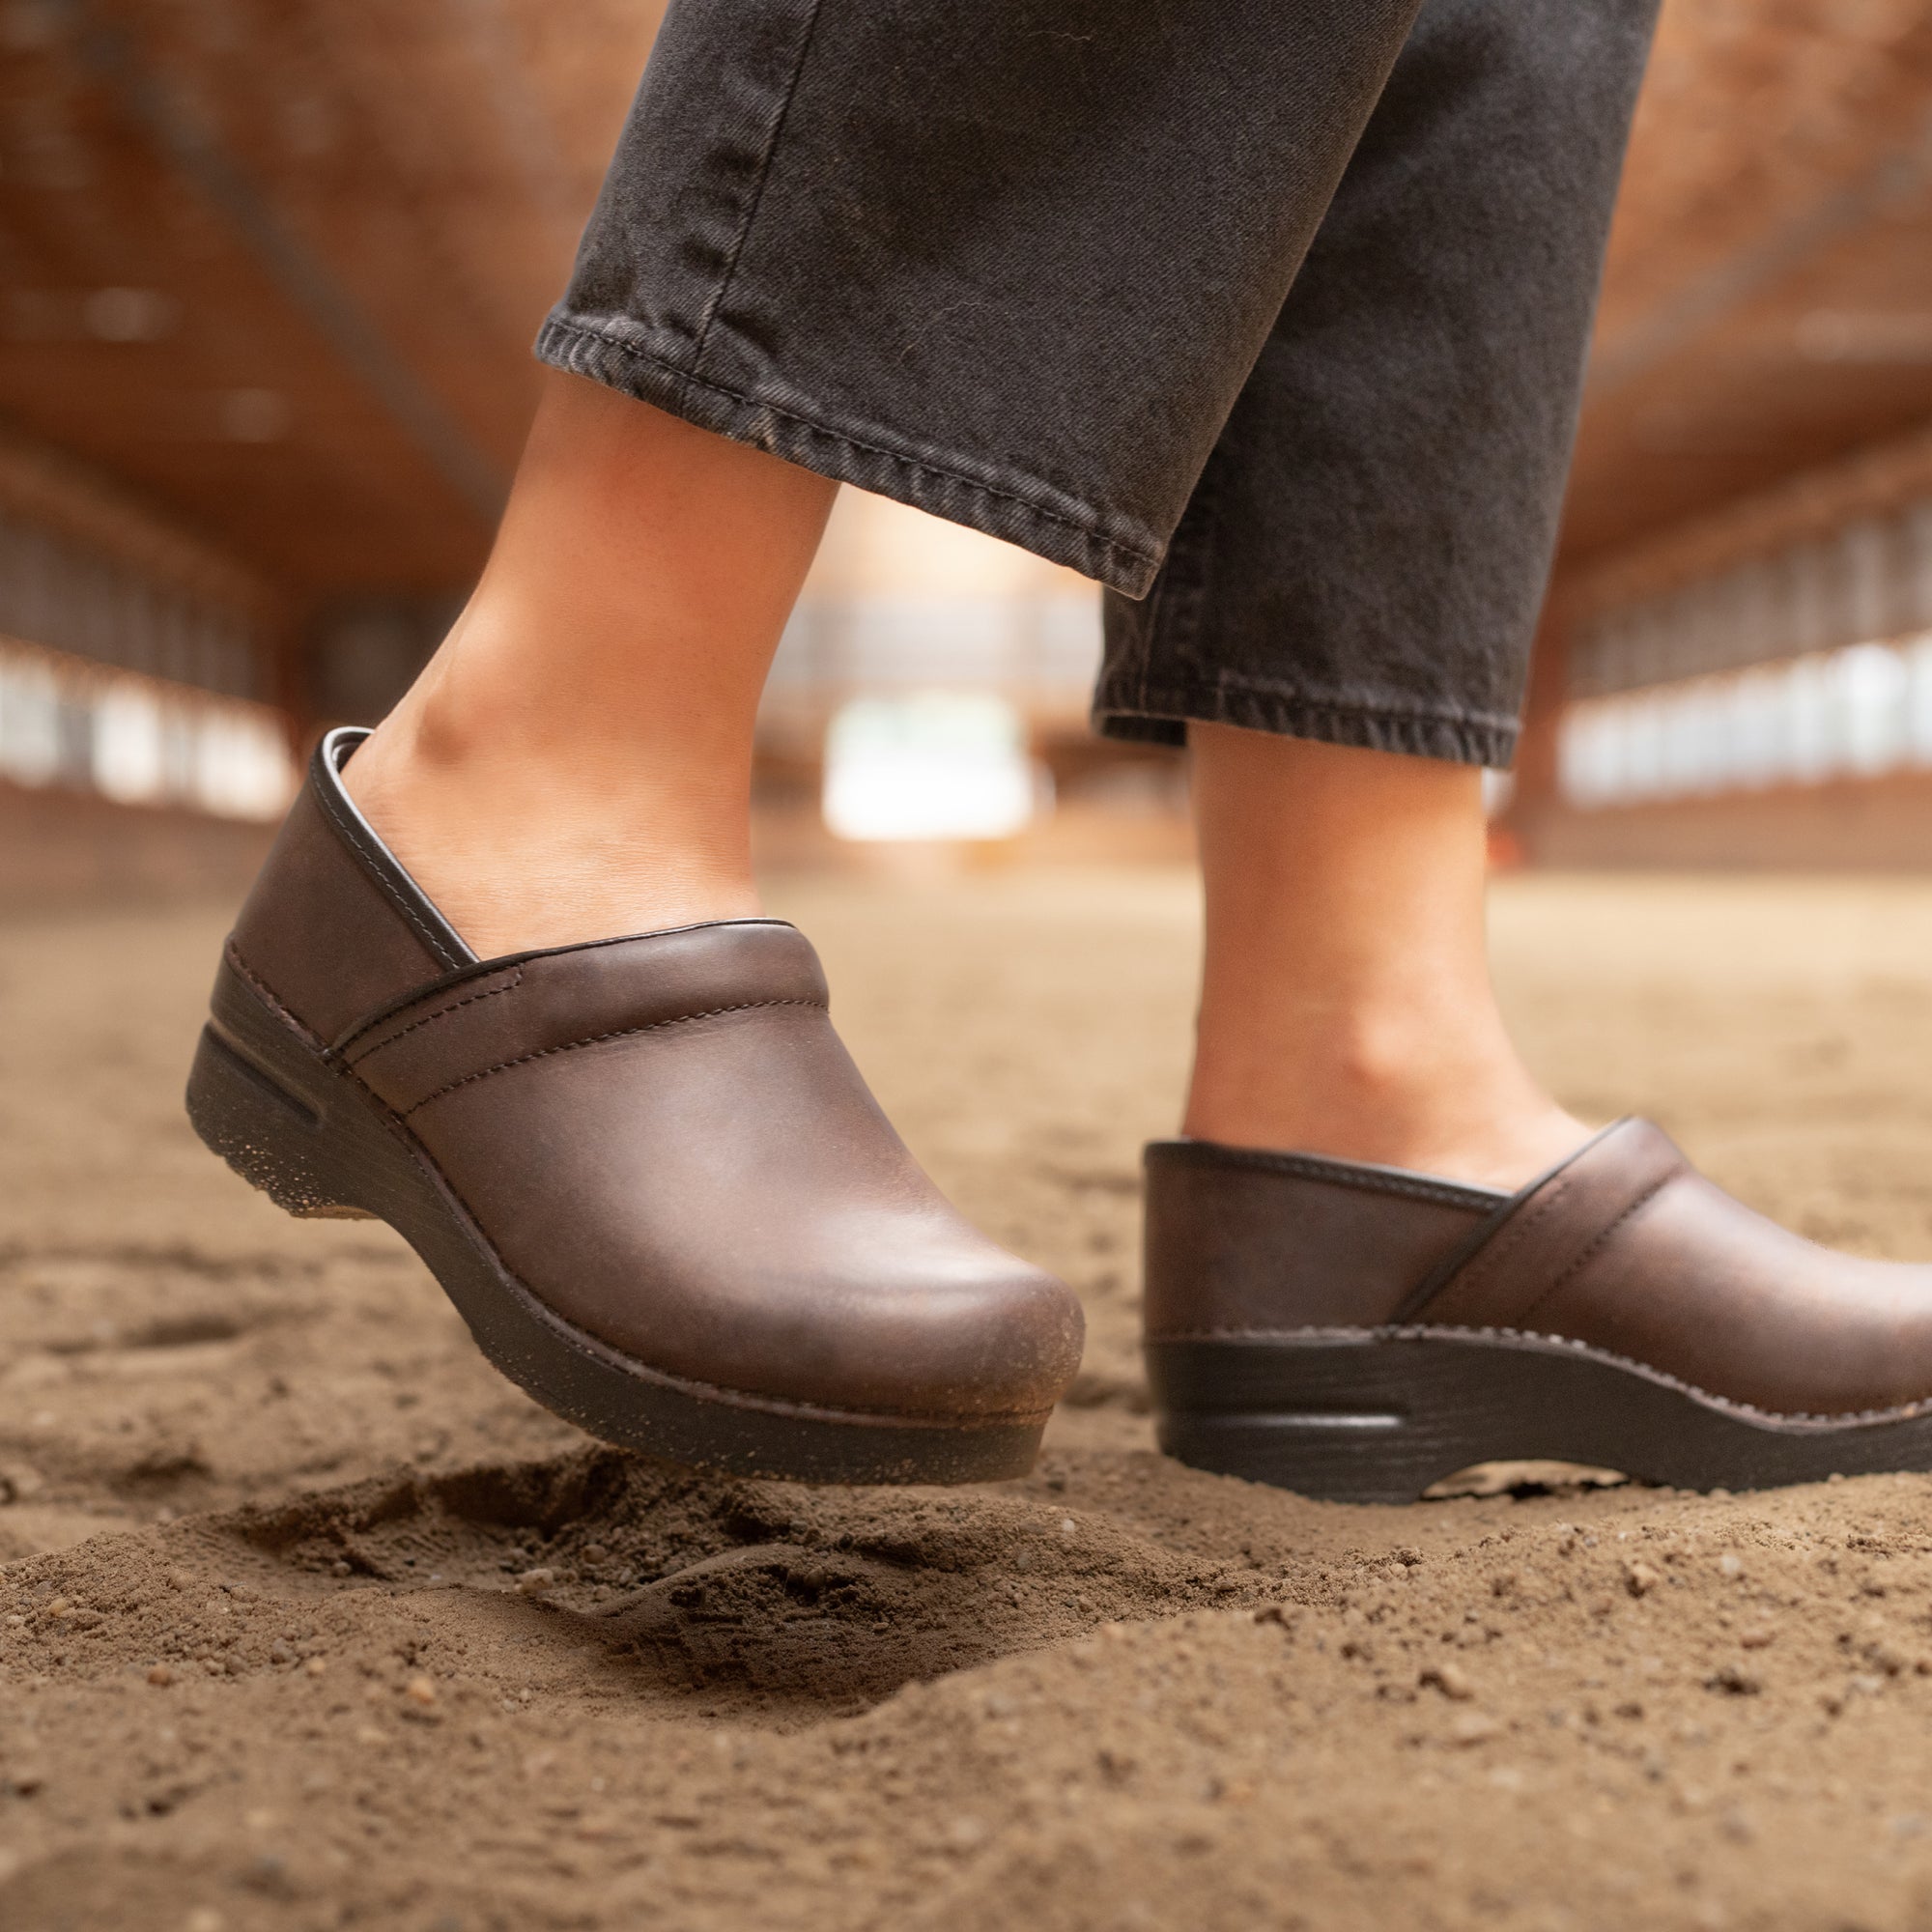 Brown Professional clogs shown with black jeans in a barn setting.